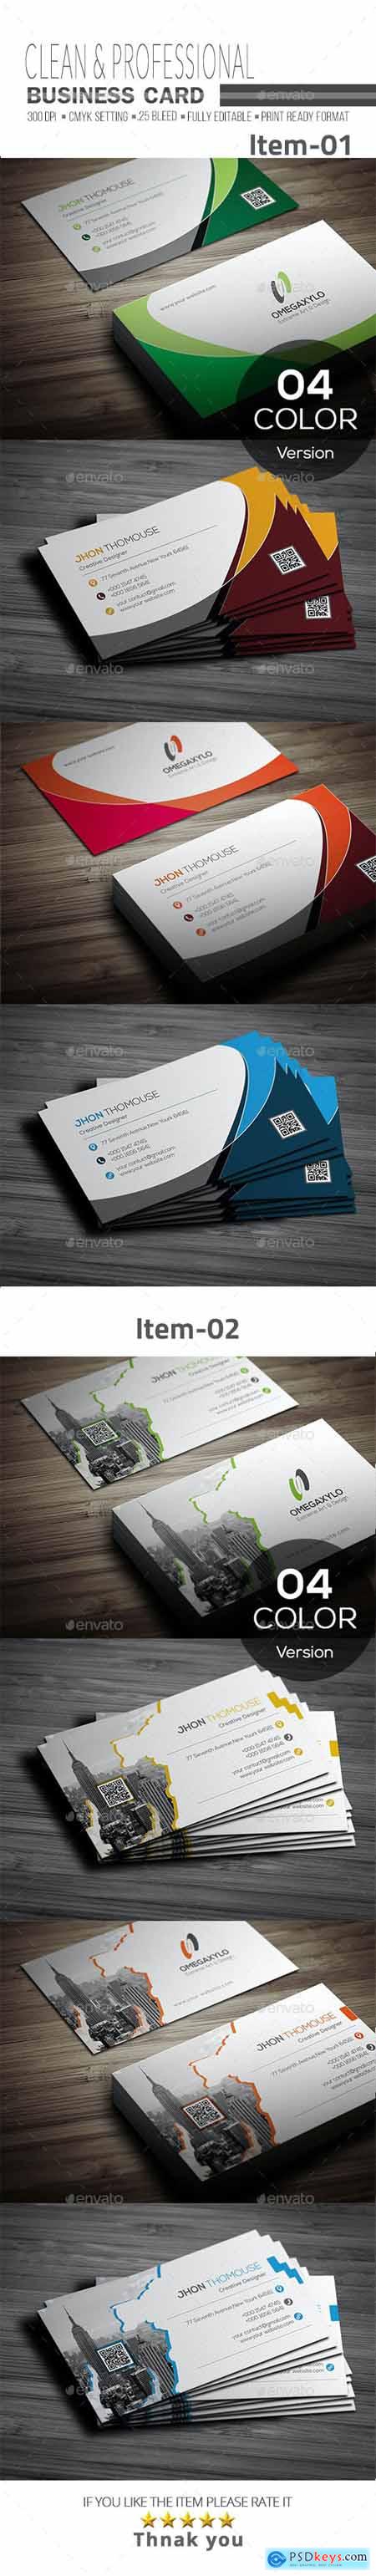 Business Card Bundle 2 In 1 20402377